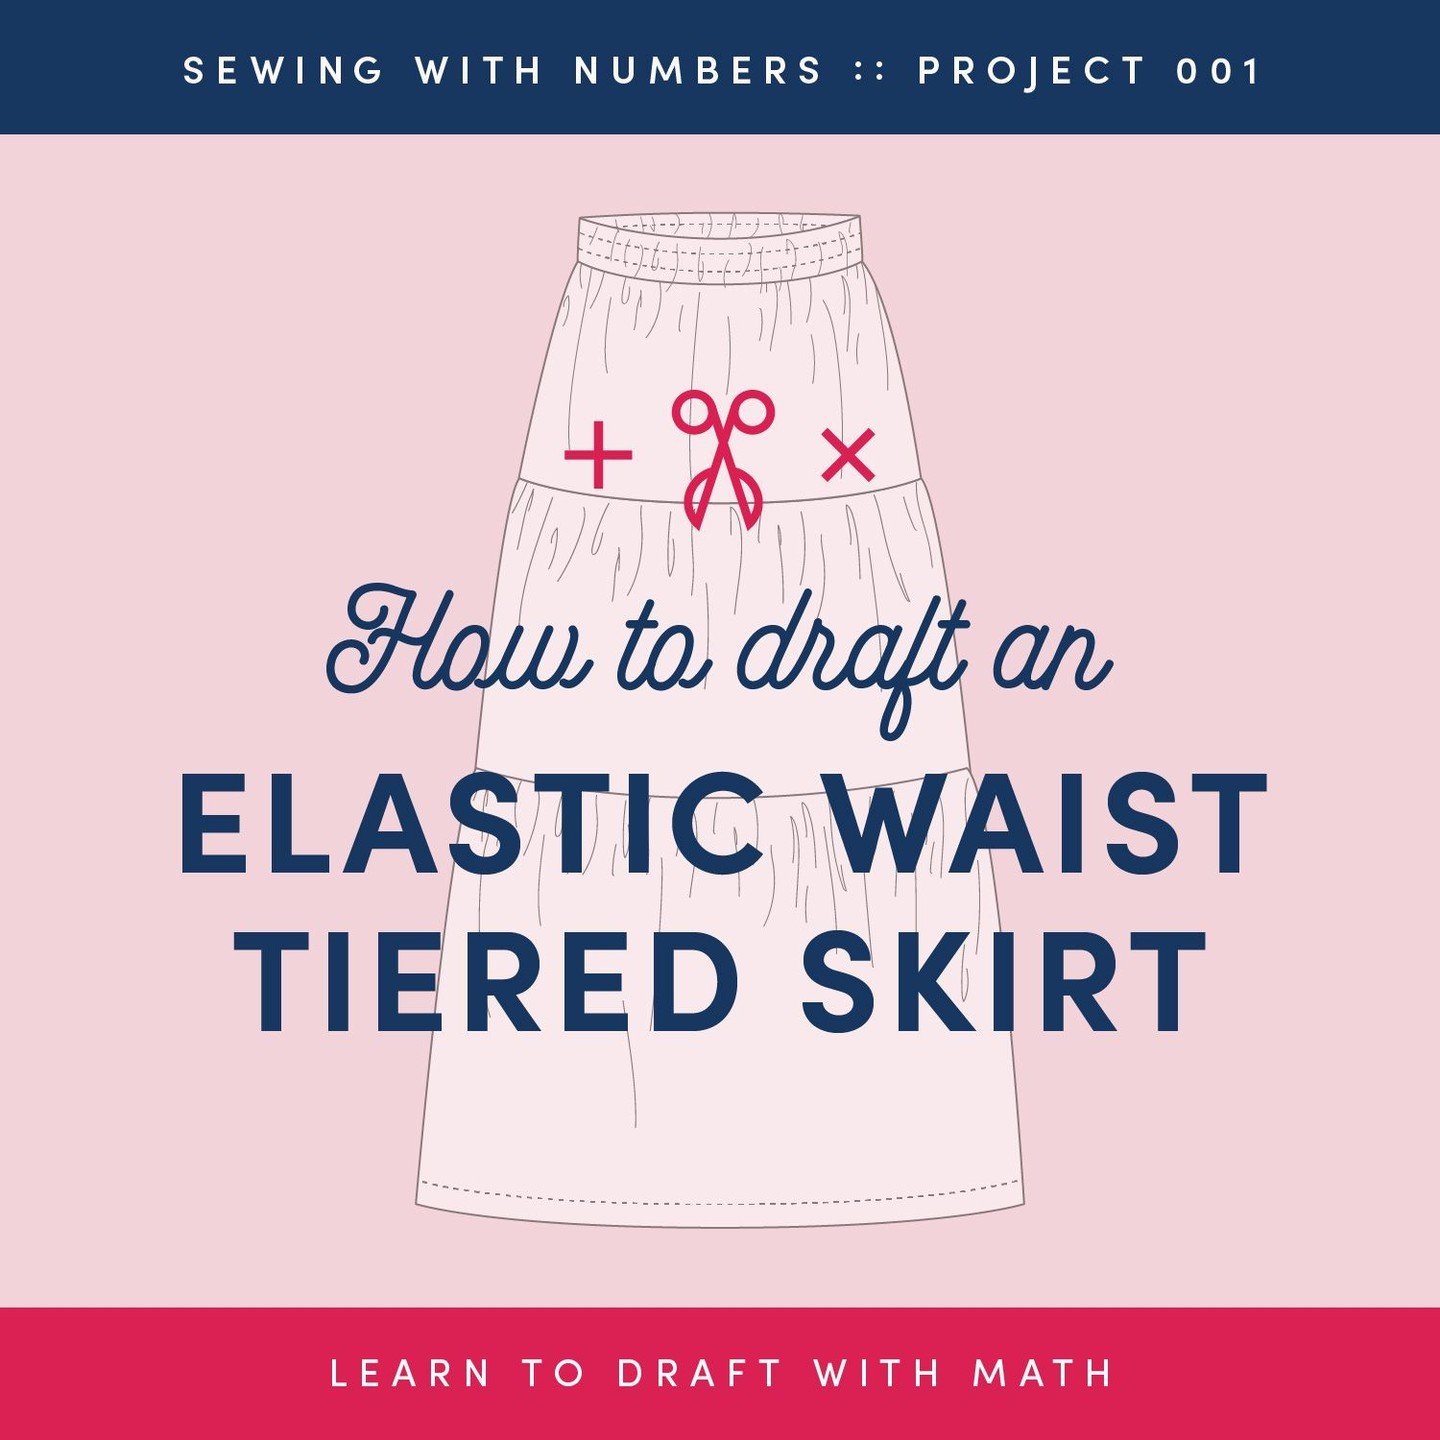 Are you curious about the math behind pattern drafting? Then you need to check out my new project, Sewing With Numbers, where I show you how to use simple math formulas to design and draft your own sewing patterns. Where most sewing blogs focus on co